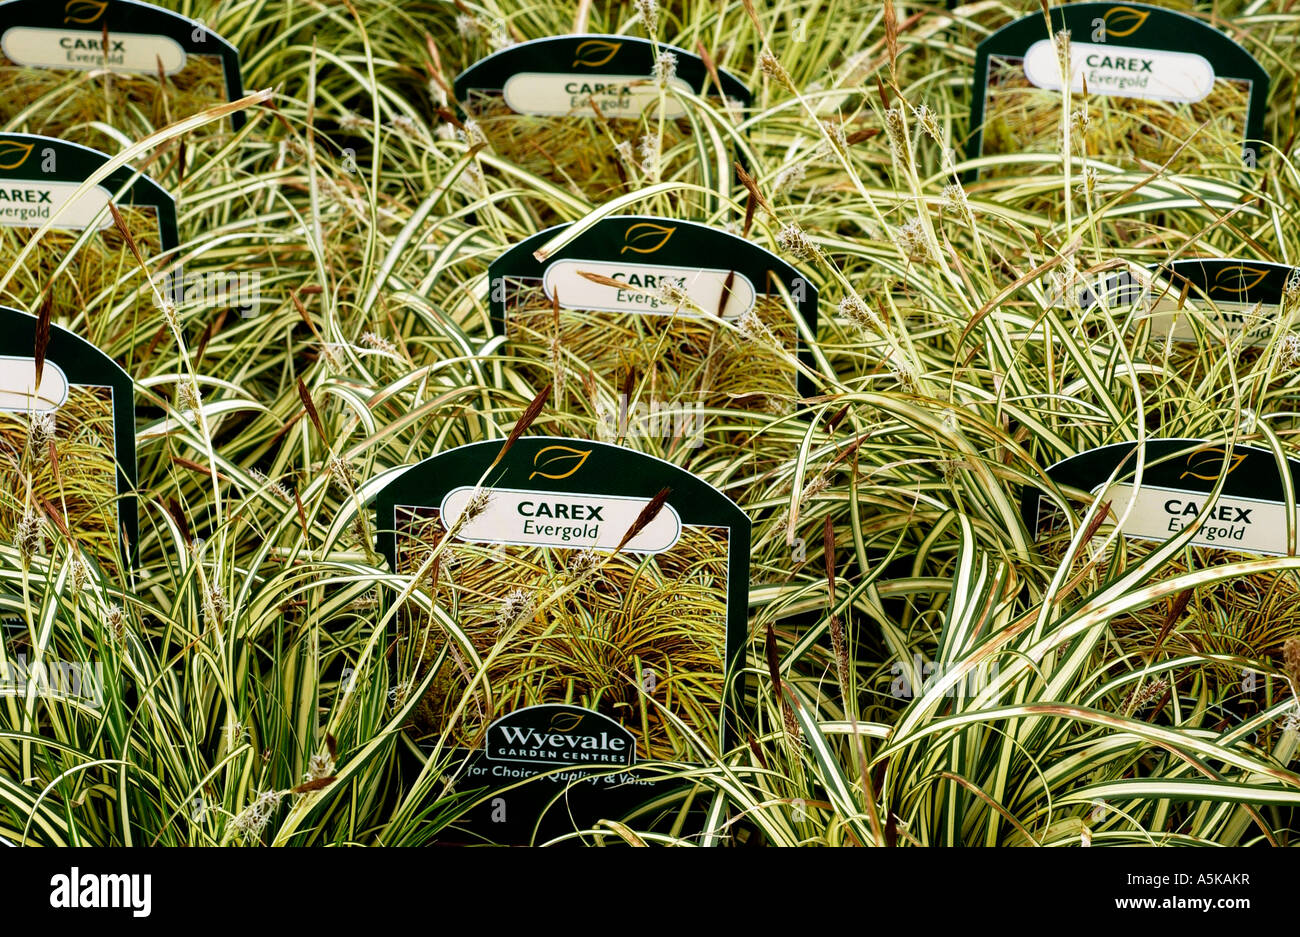 Carex grasses for sale in a Wyevale garden centre Stock Photo